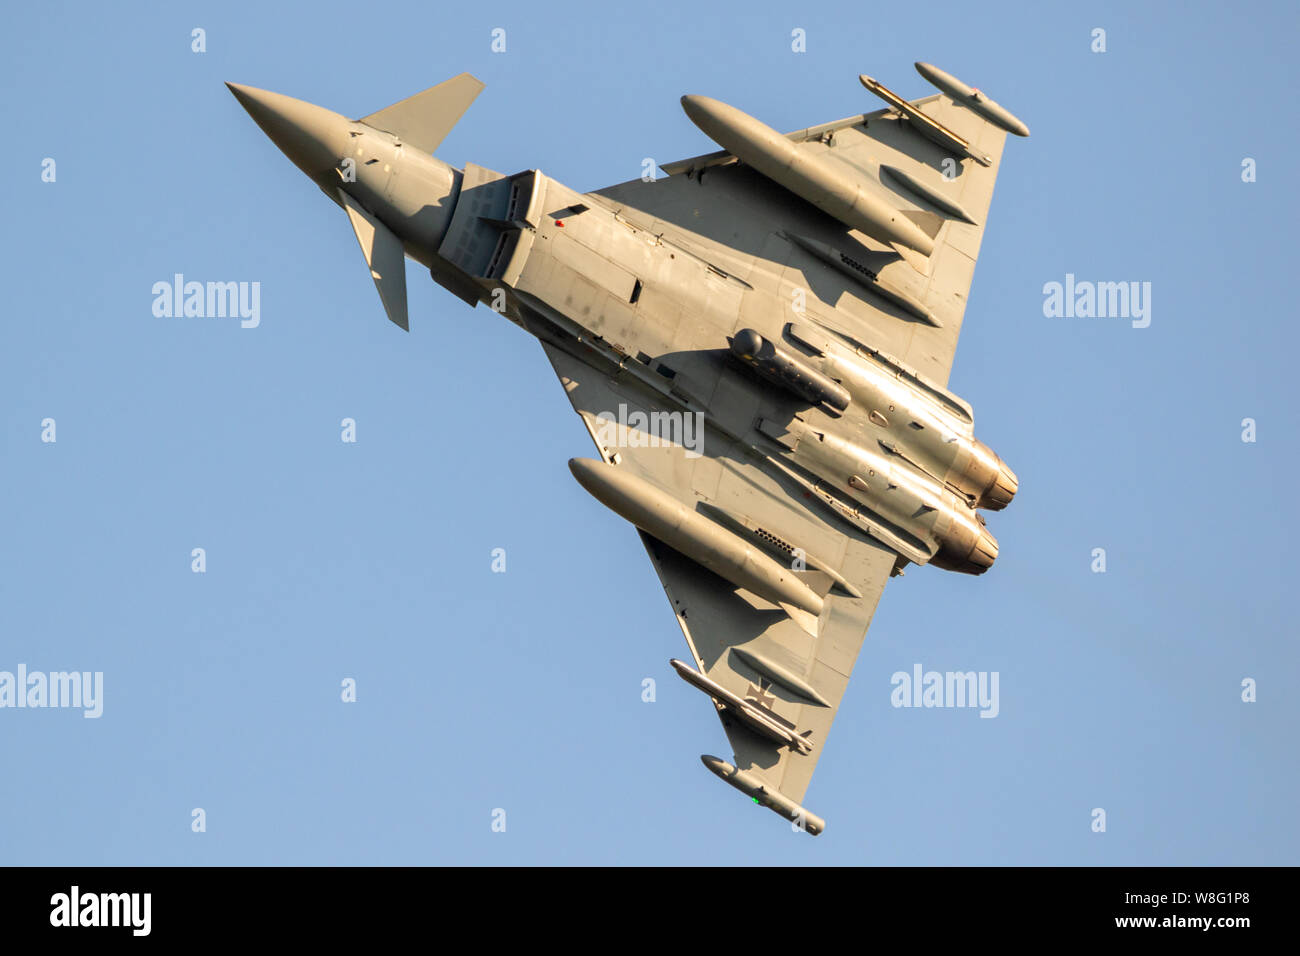 LEEUWARDEN, NETHERLANDS - MAR 28, 2017: German Air Force Eurofighter Typhoon fighter jet aircraft in flight during exercise Frisian Flag. Stock Photo